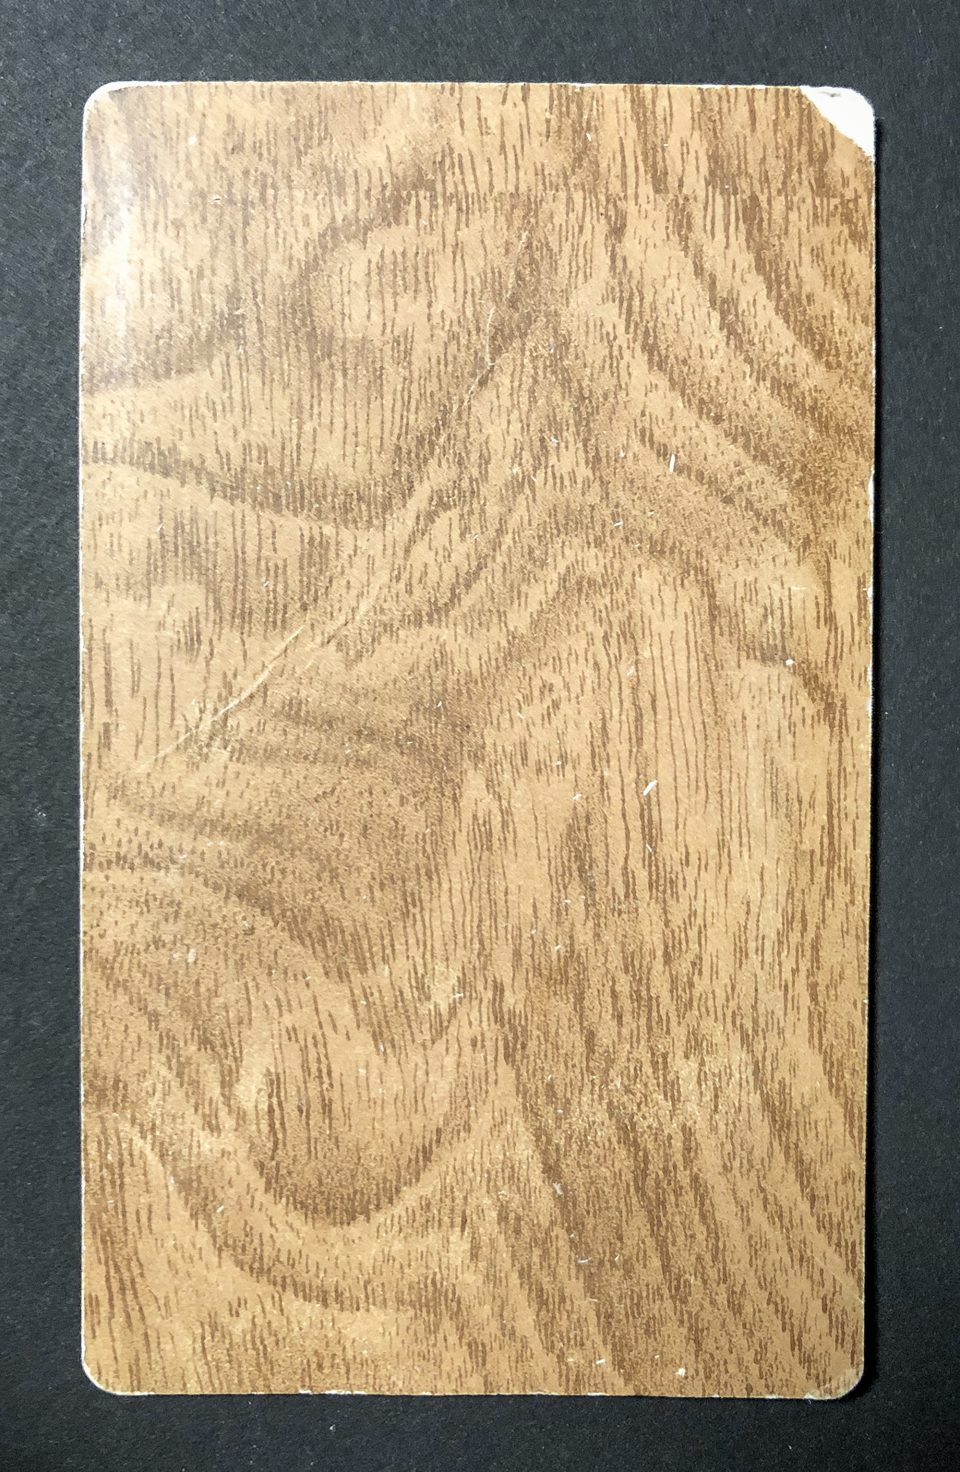 The reverse of the card is covered by a printed woodgrain texture. It's the only time I've ever seen this!